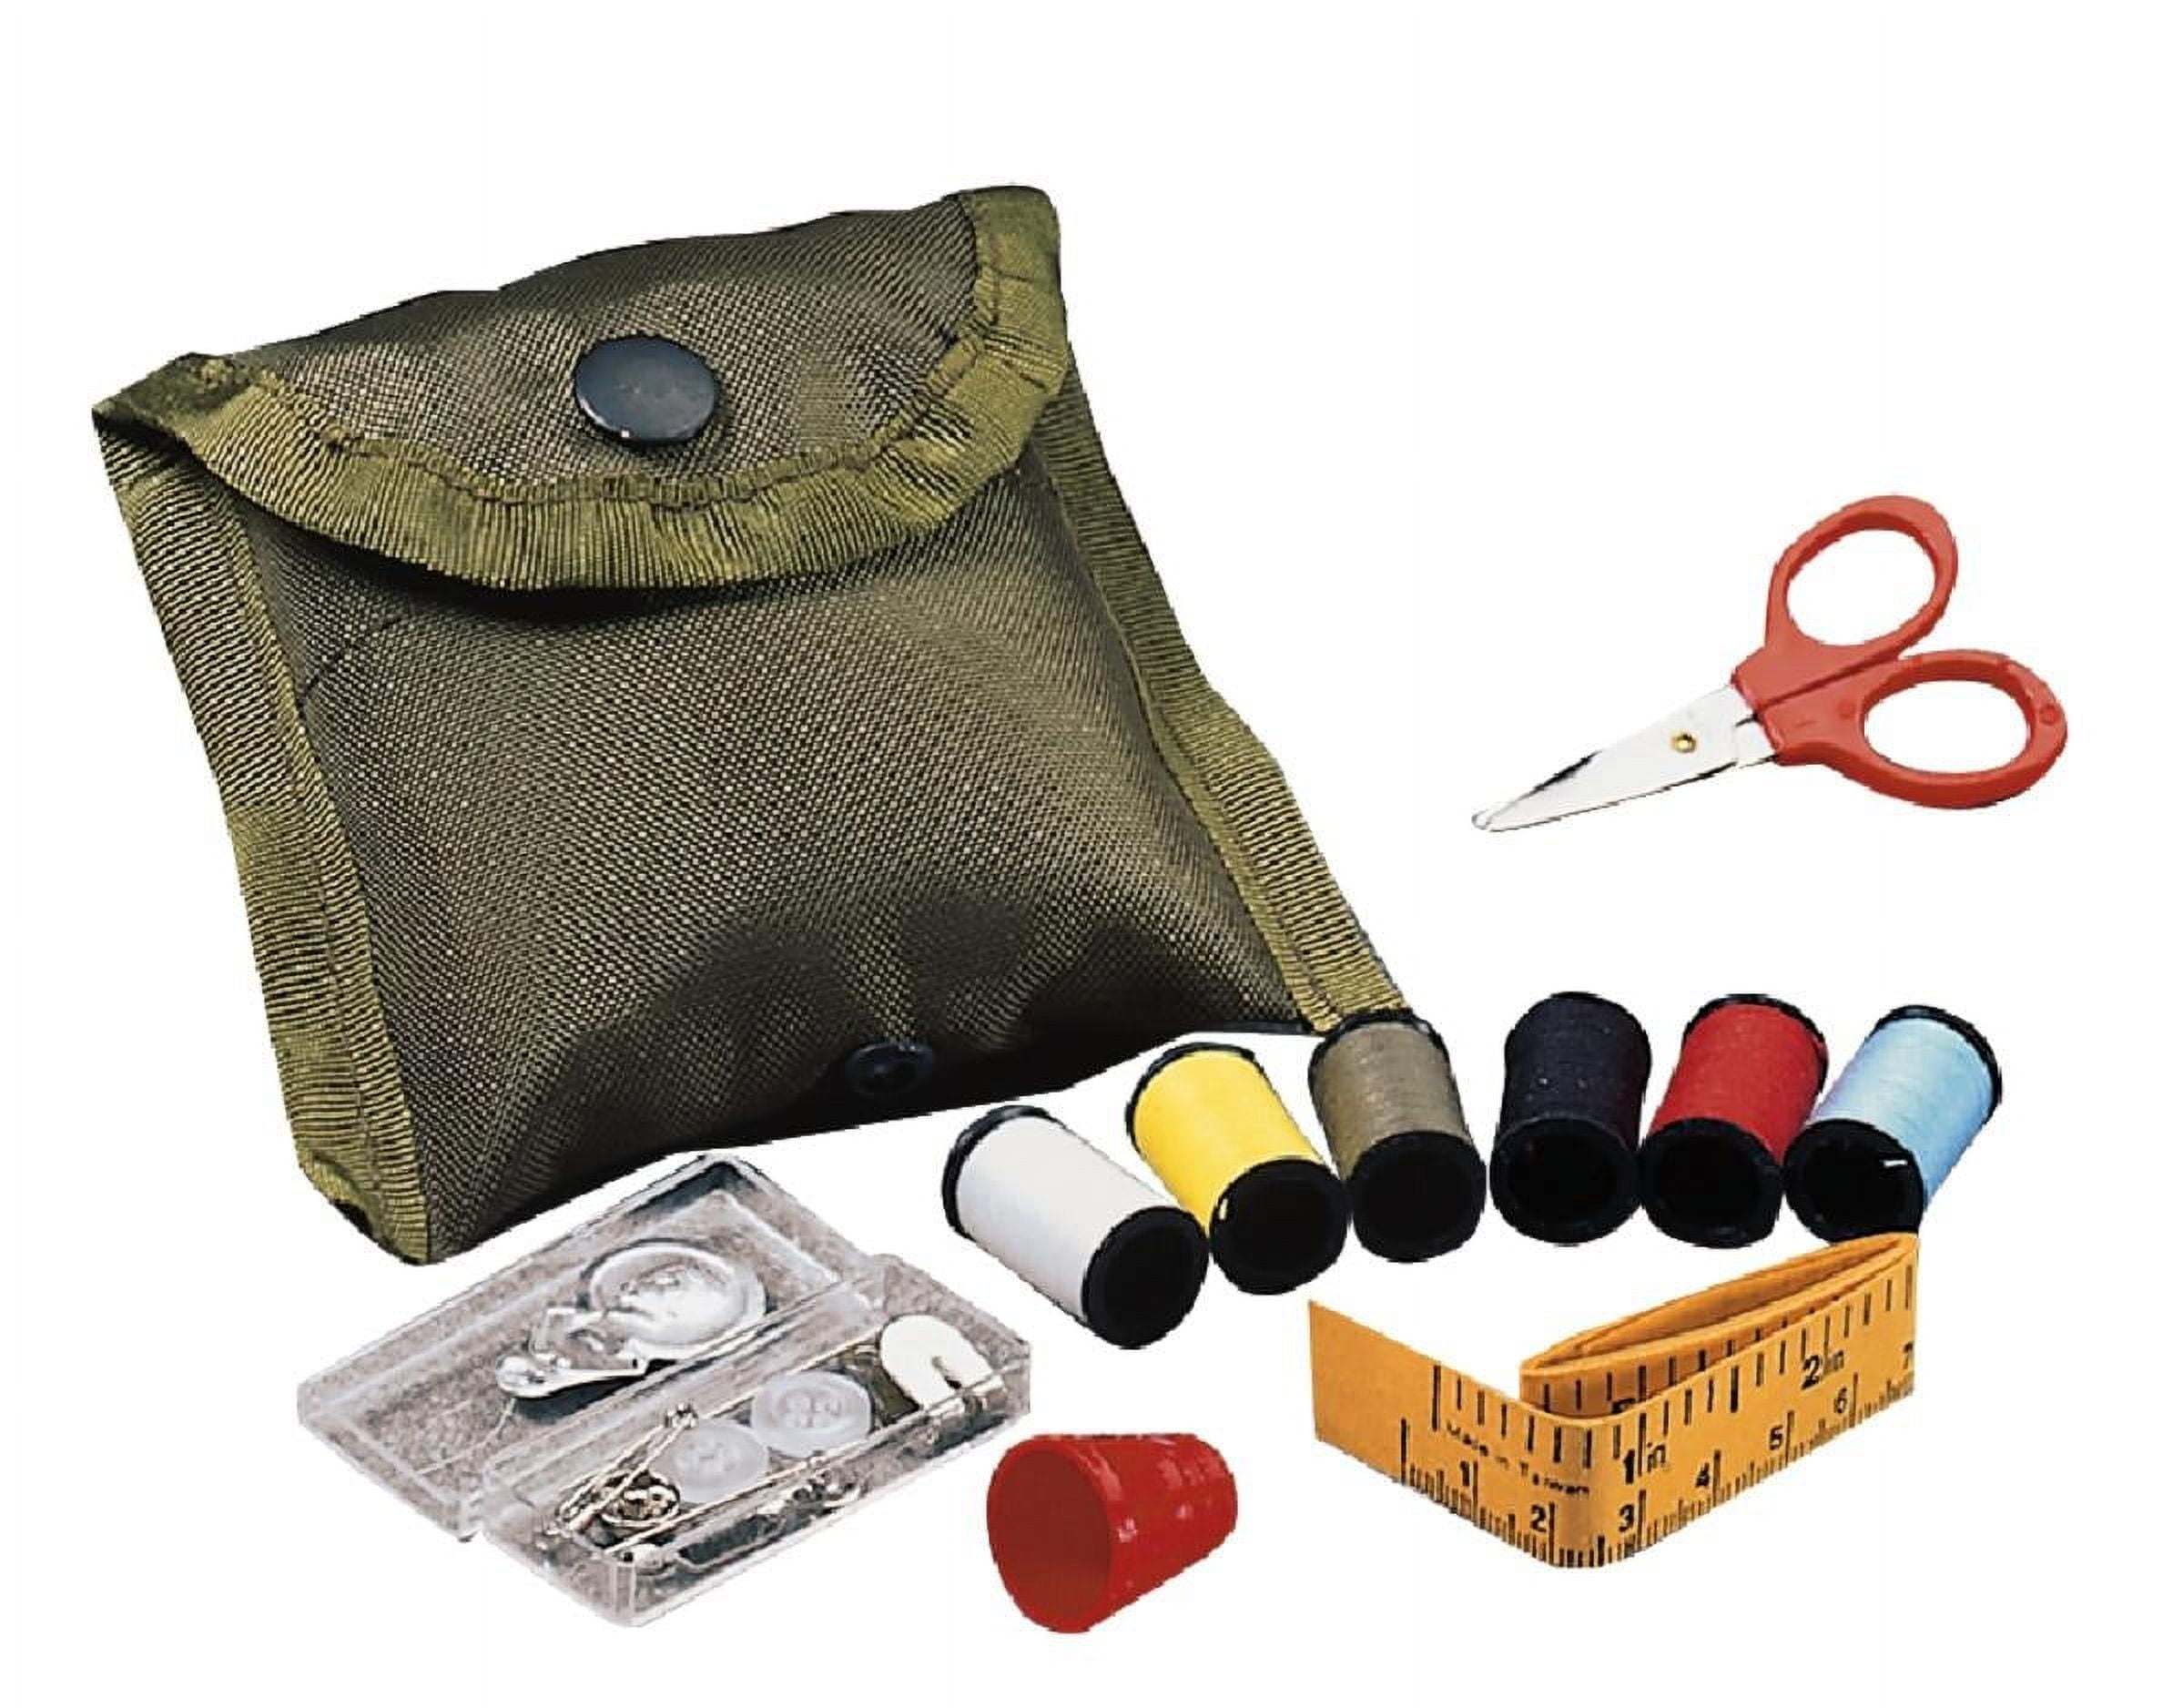 Michley Fs-092 Sewing Kit With 100 Pieces Including Thread Spools, Bobbins,  Scissors, Needles, Thimbles, And More